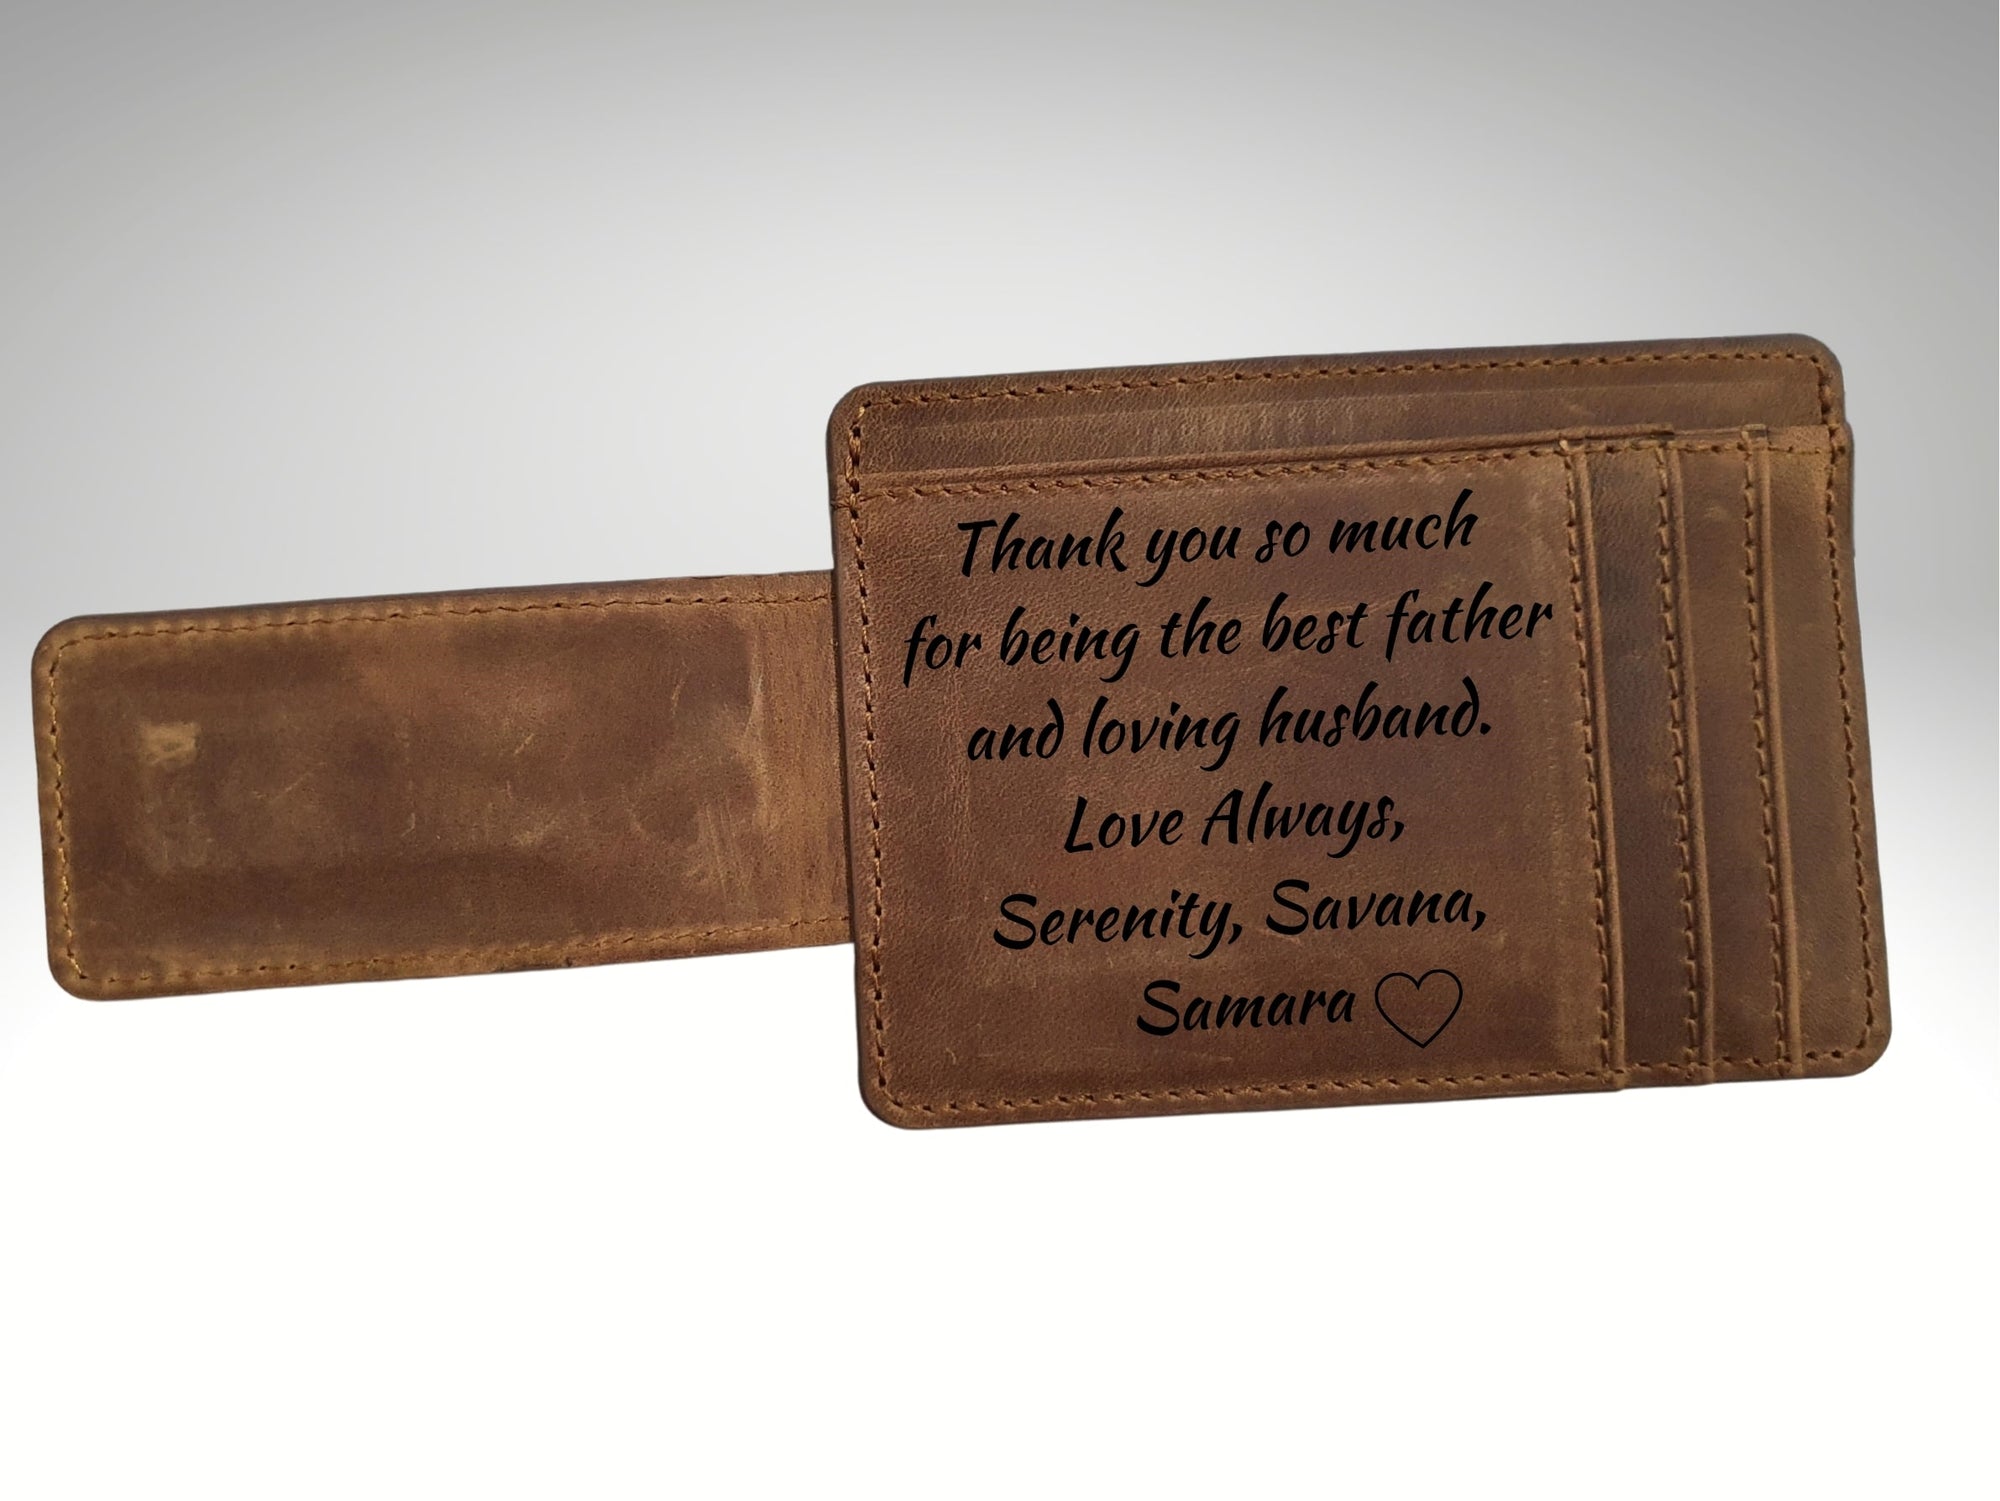 Personalized Money Clip Leather Money Clip Engraved Money 